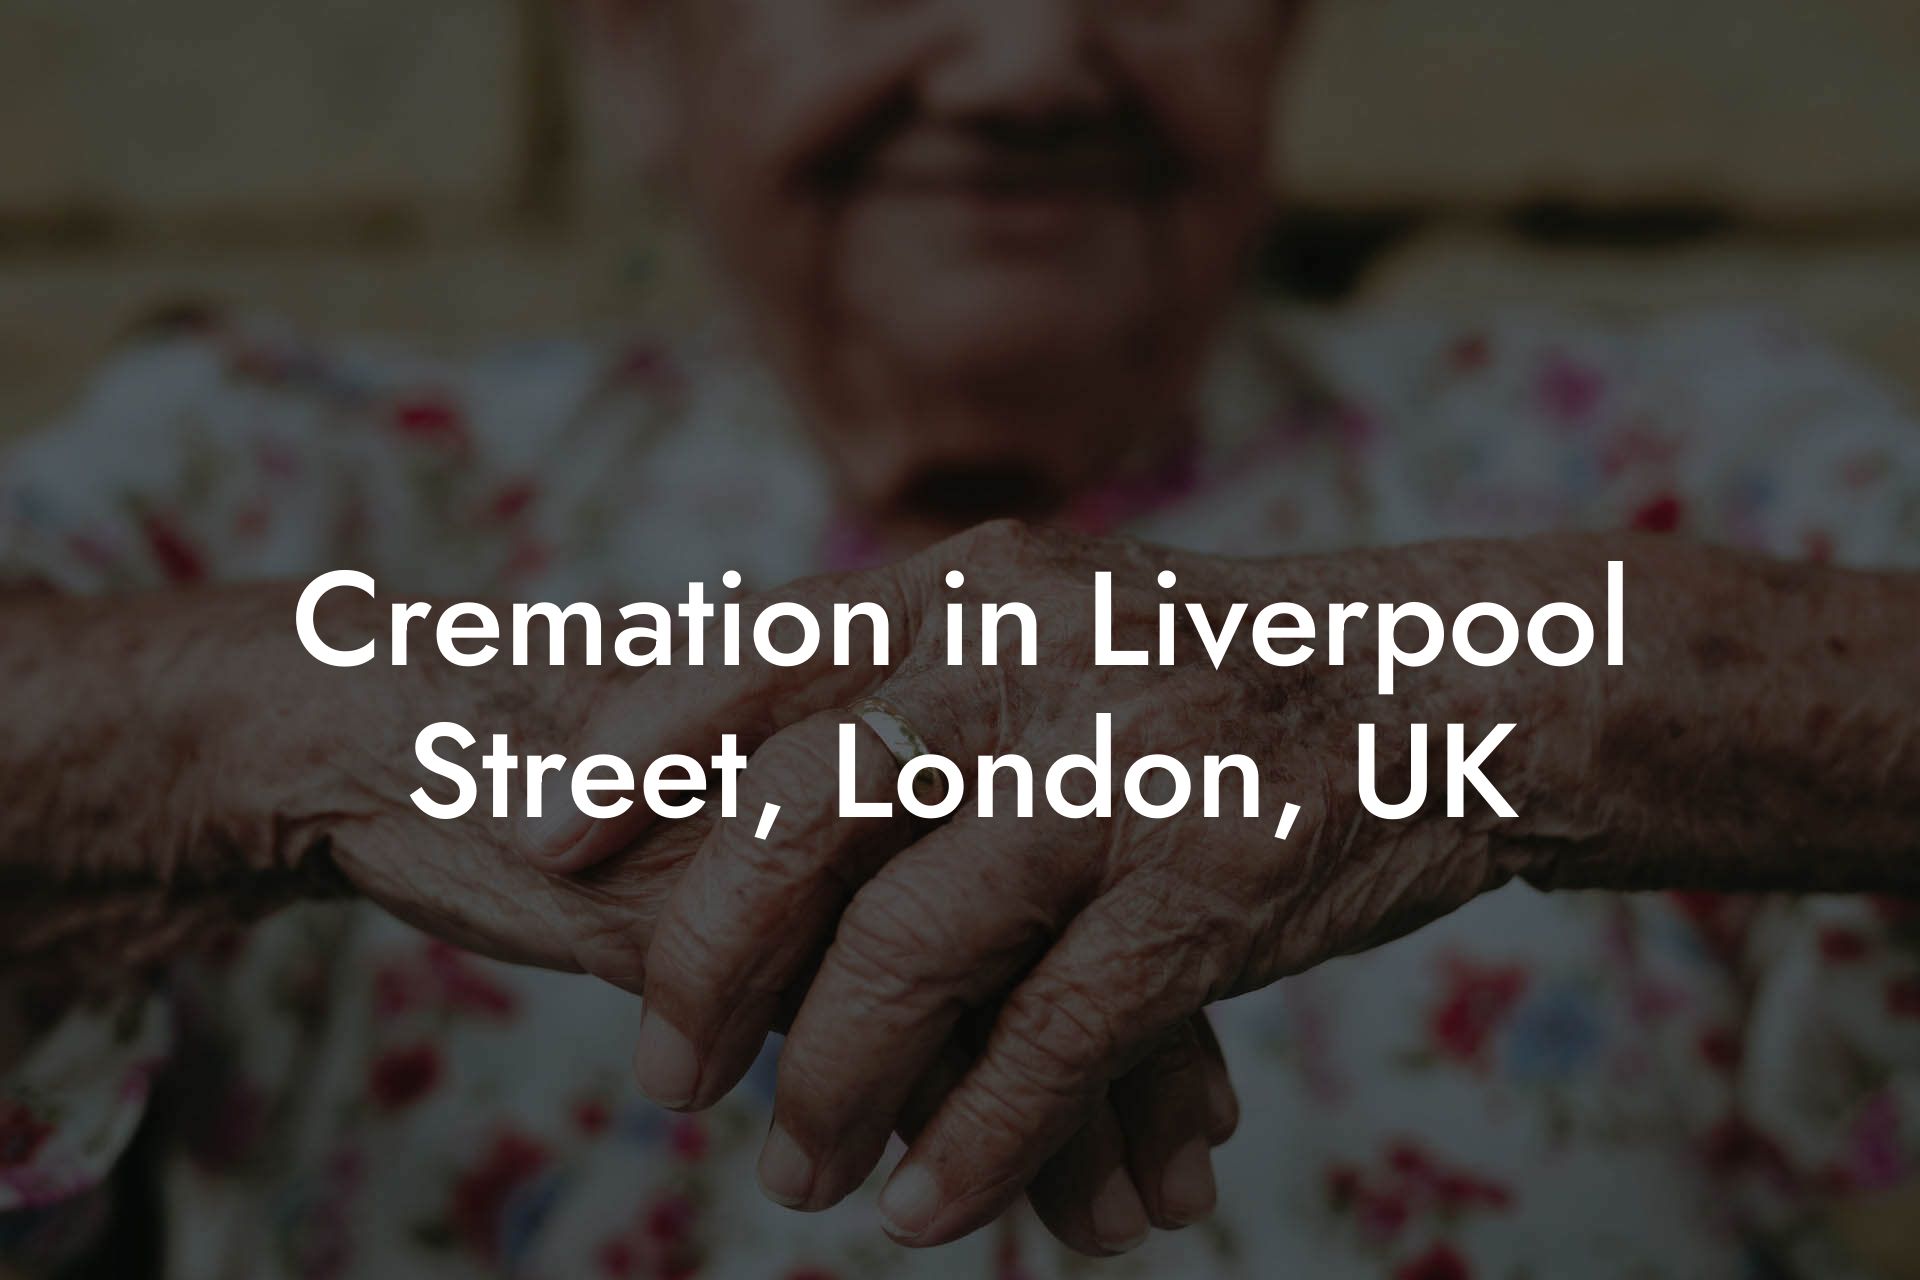 Cremation in Liverpool Street, London, UK